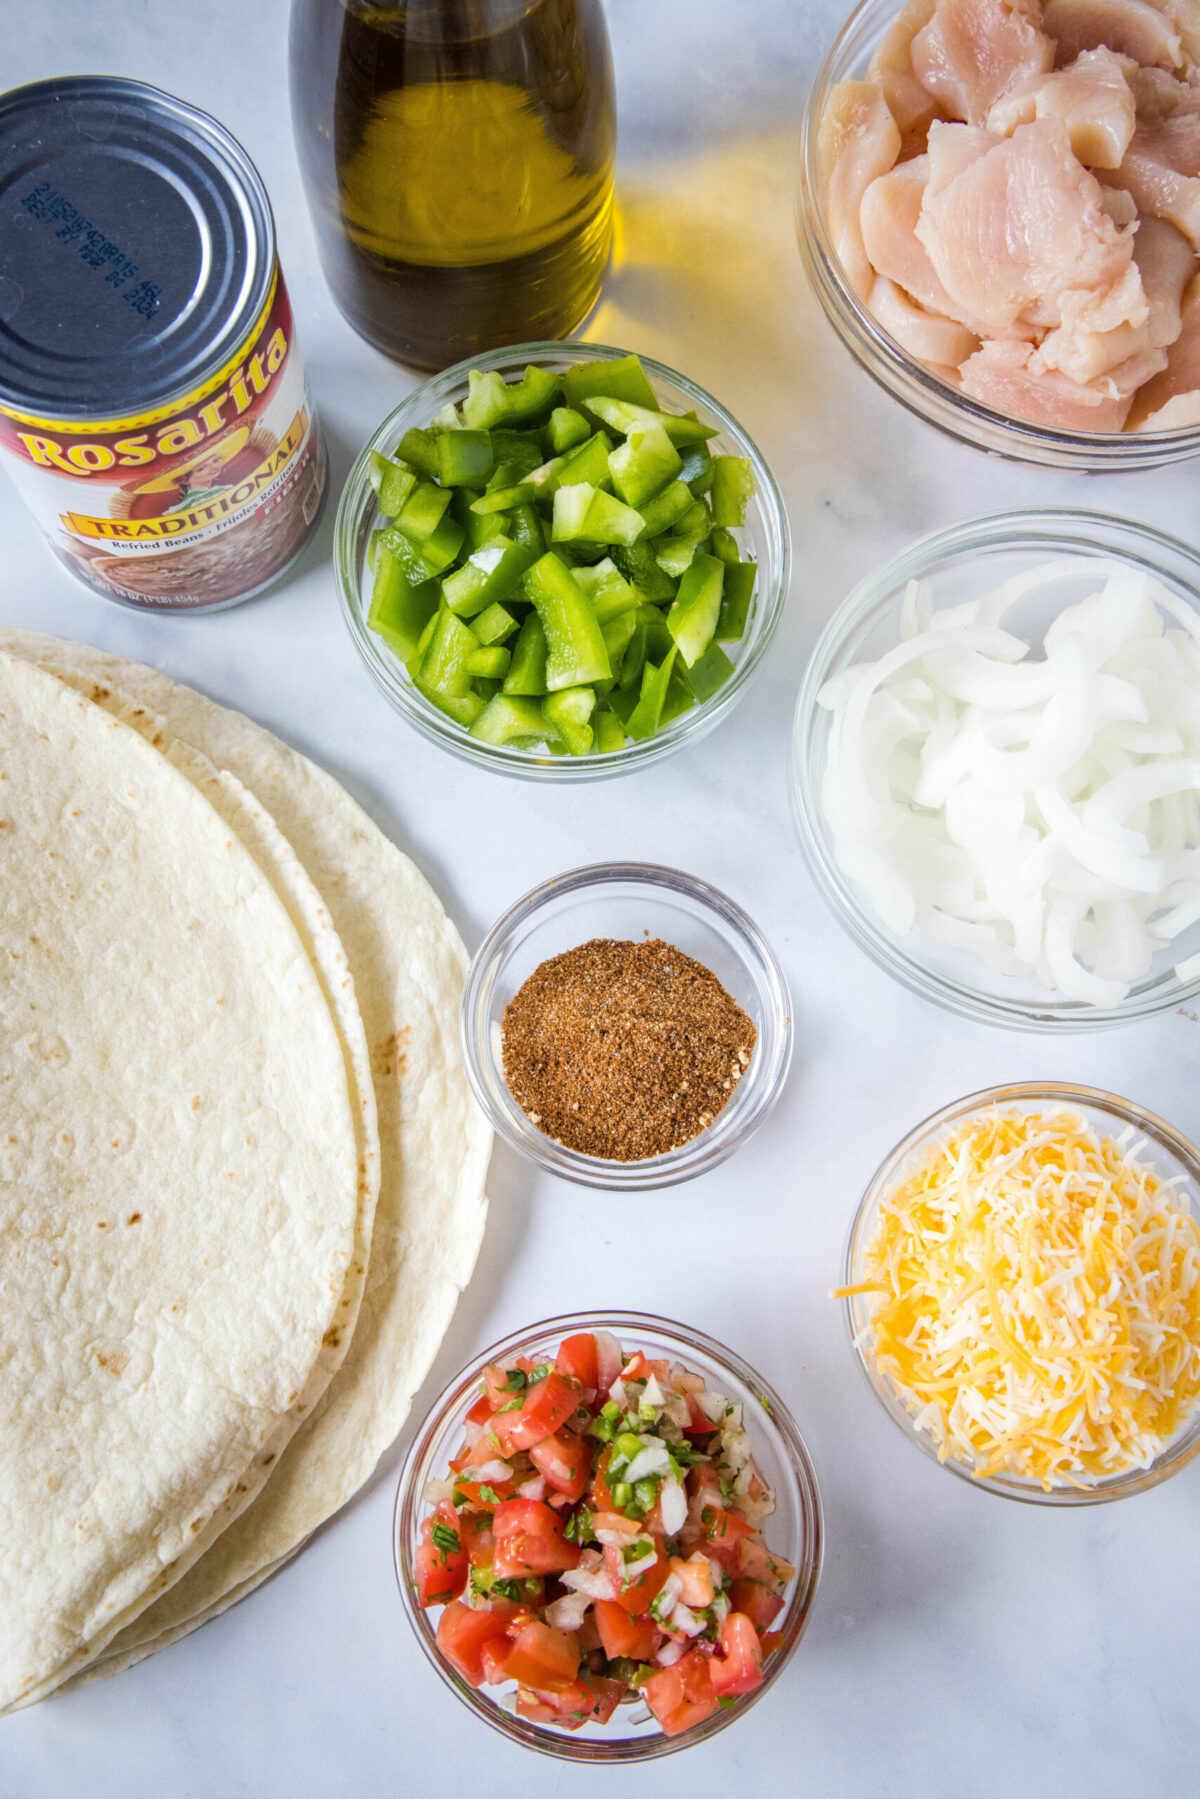 Overhead view of the ingredients needed for chicken fajita wraps: a stack of tortillas, a can of refried beans, a bottle of olive oil, a bowl of chicken, a bowl of onions, a bowl of green peppers, a bowl of shredded cheese, a bowl of pico de gallo, and a bowl of spices.